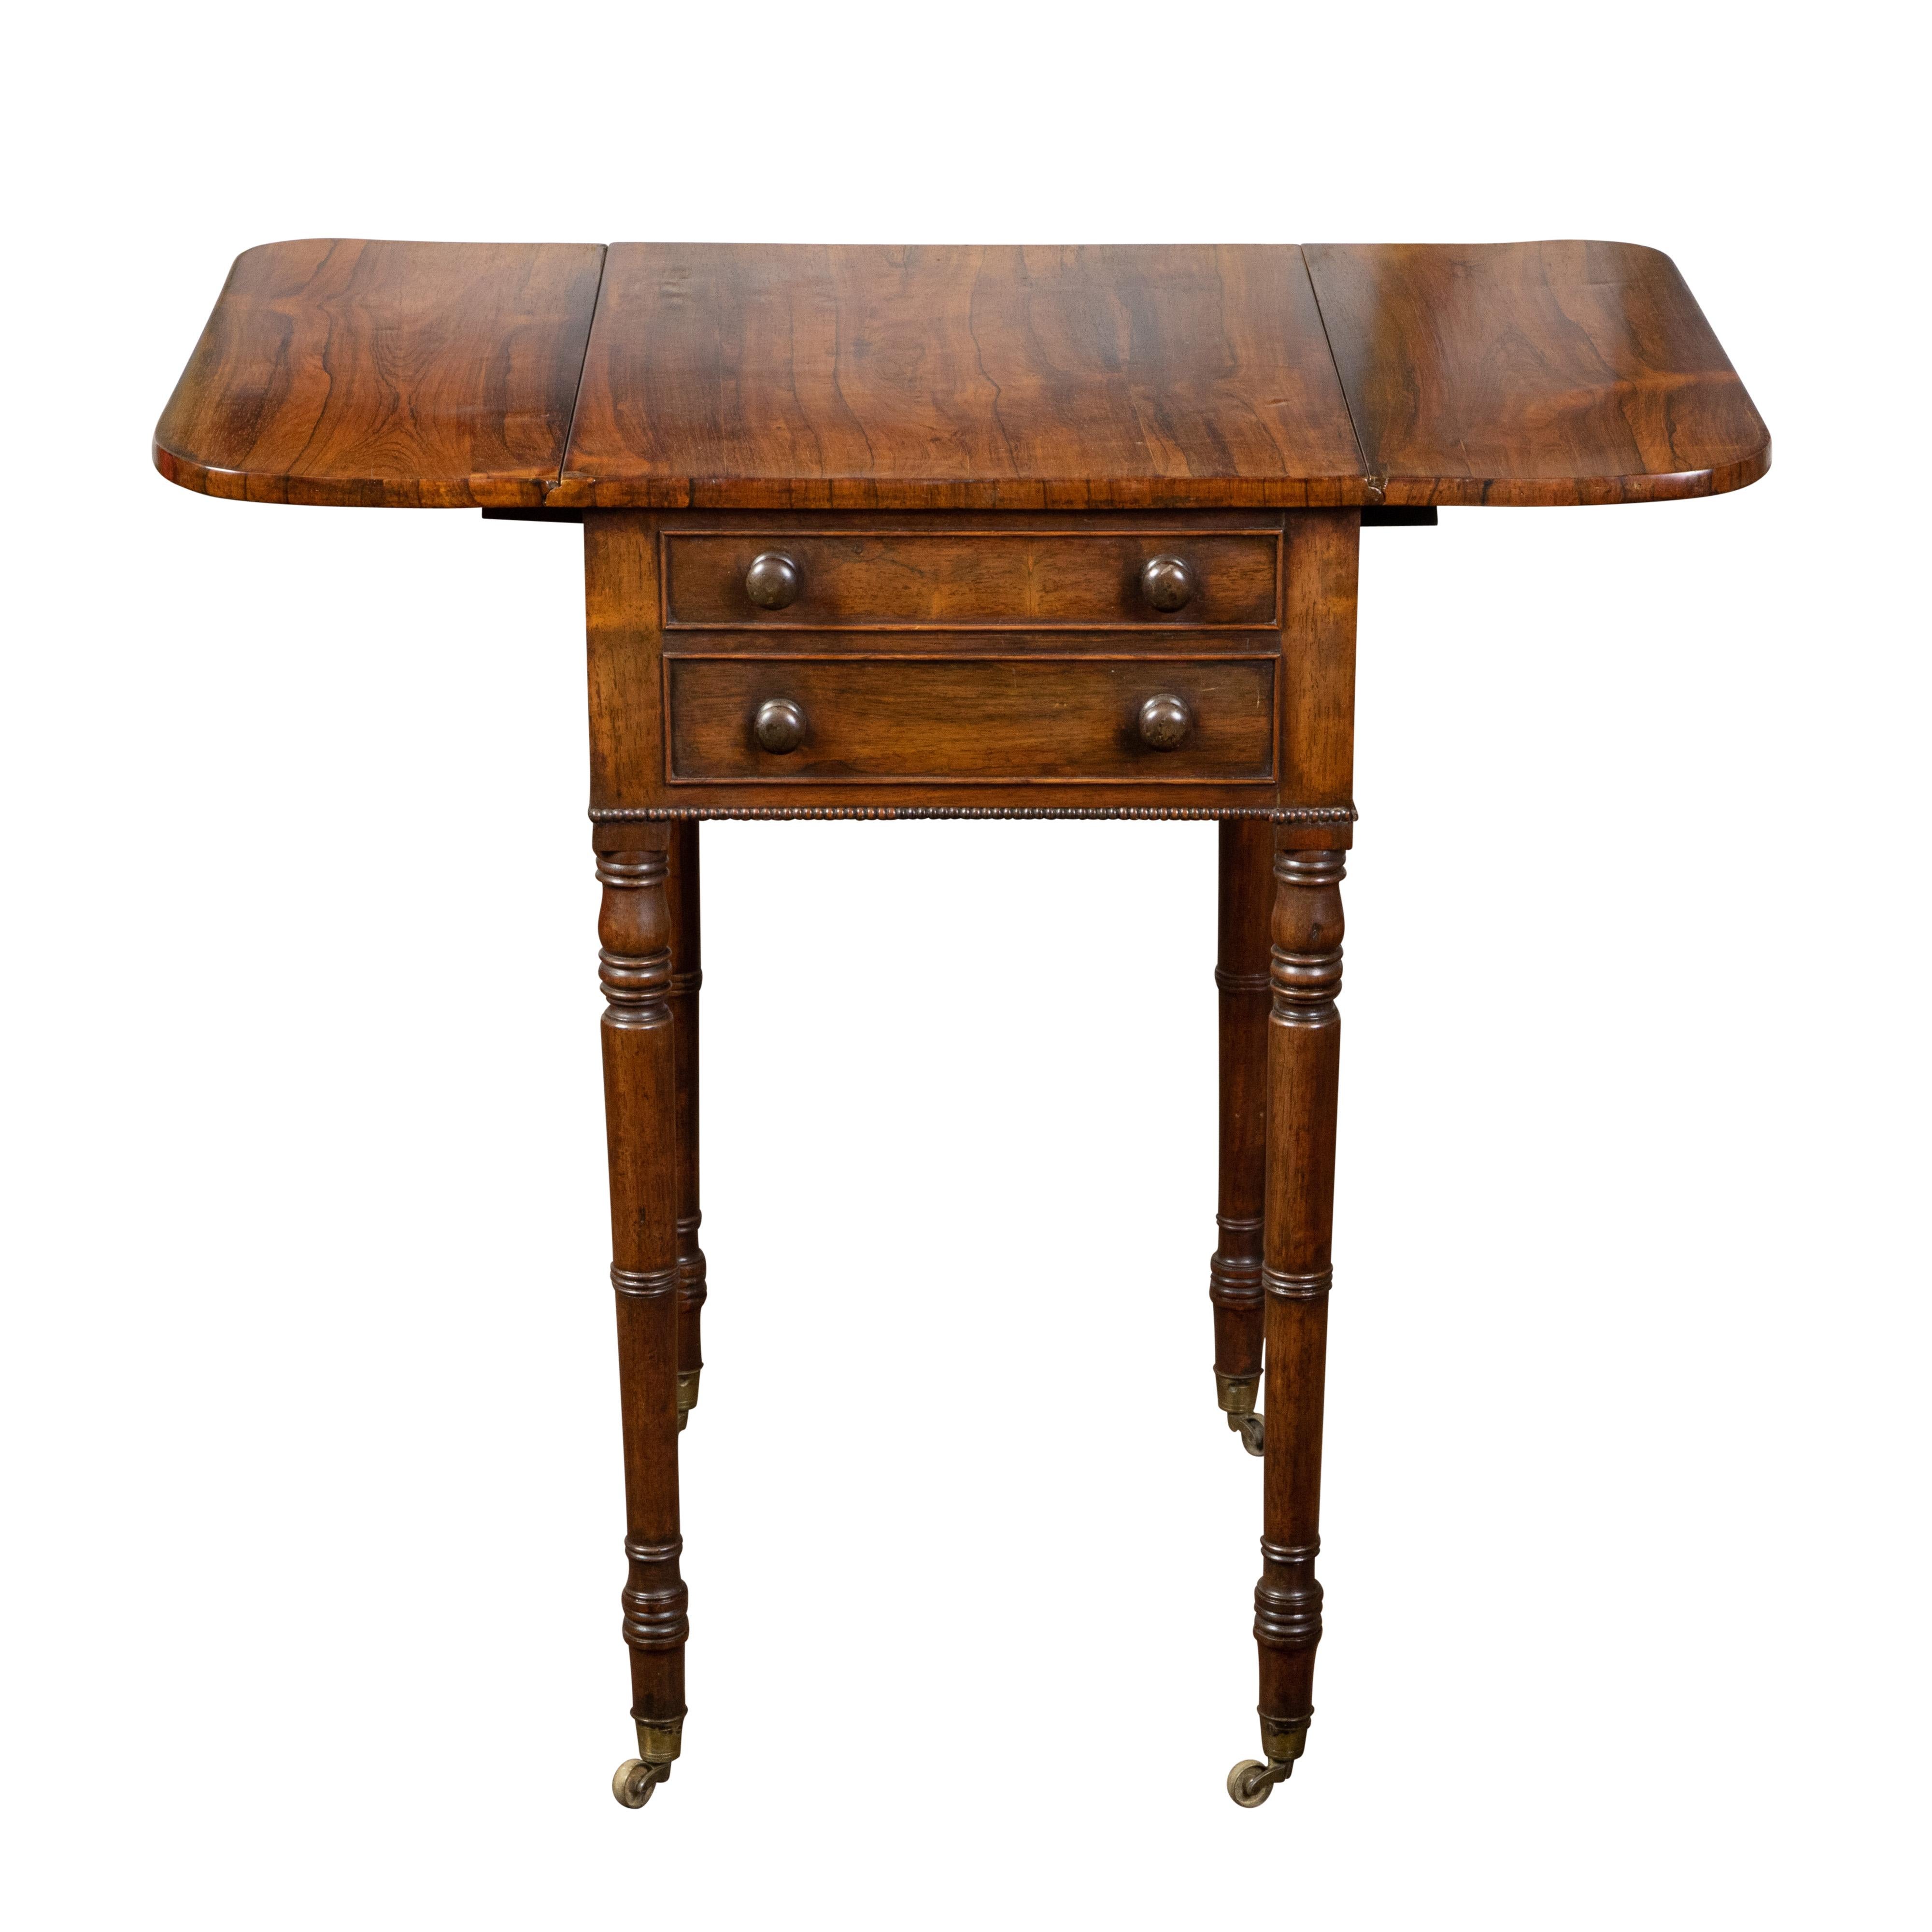 An English Regency period mahogany Pembroke table from the early 19th century, with two drop leaves and drawers. Created in England during the first quarter of the 19th century, this Pembroke table features a rectangular veneered top flanked with